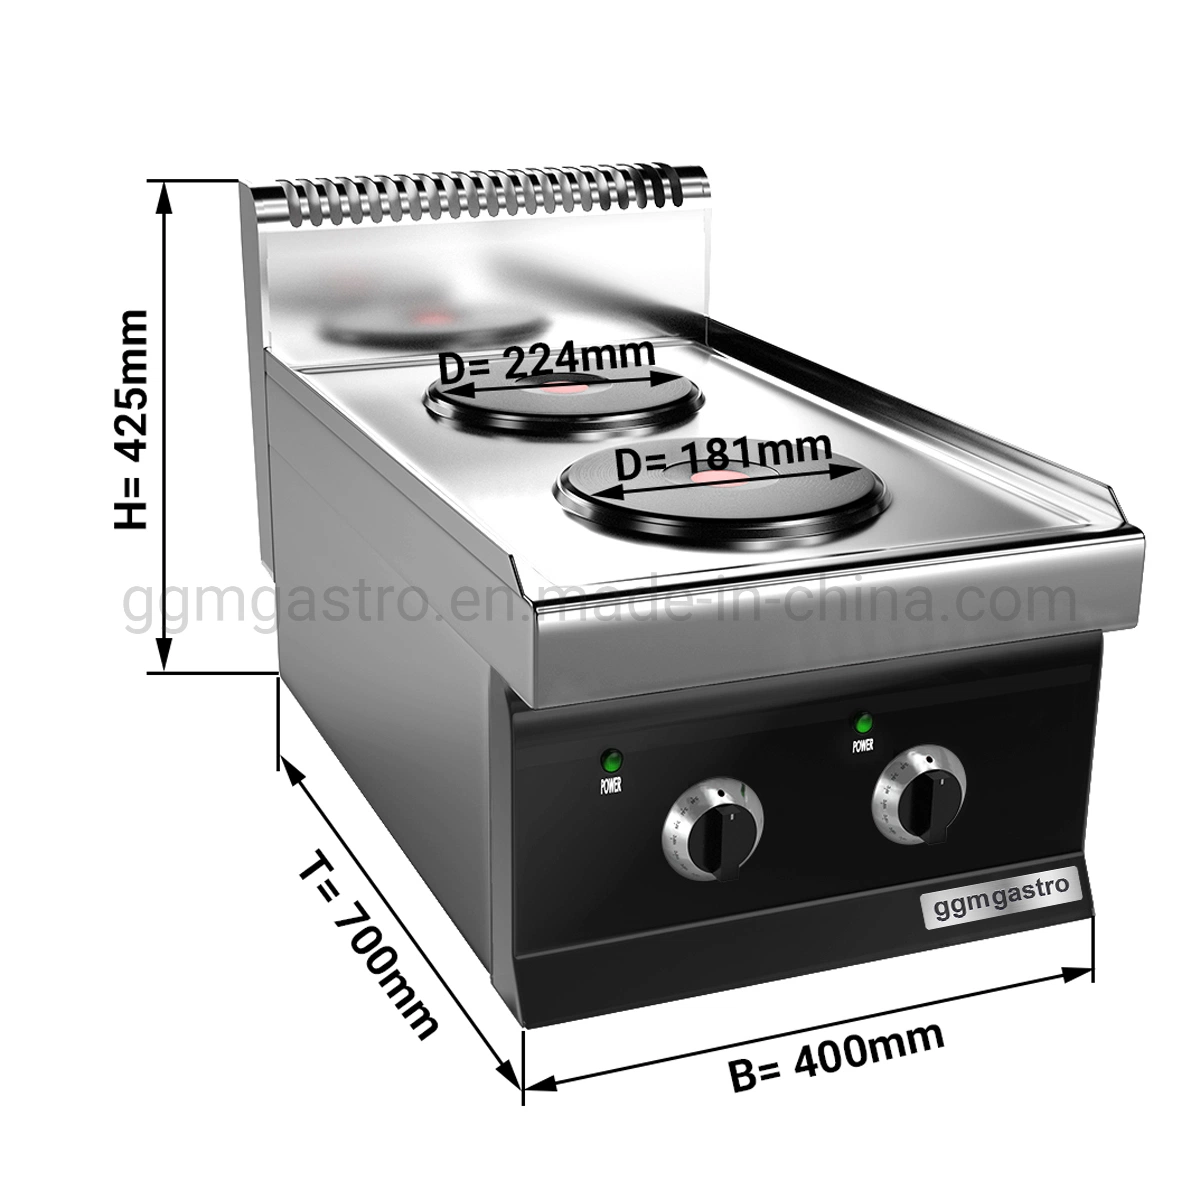 Stainless Steel Commercial Cooking Equipment Electric Stove with 2 Round Plates